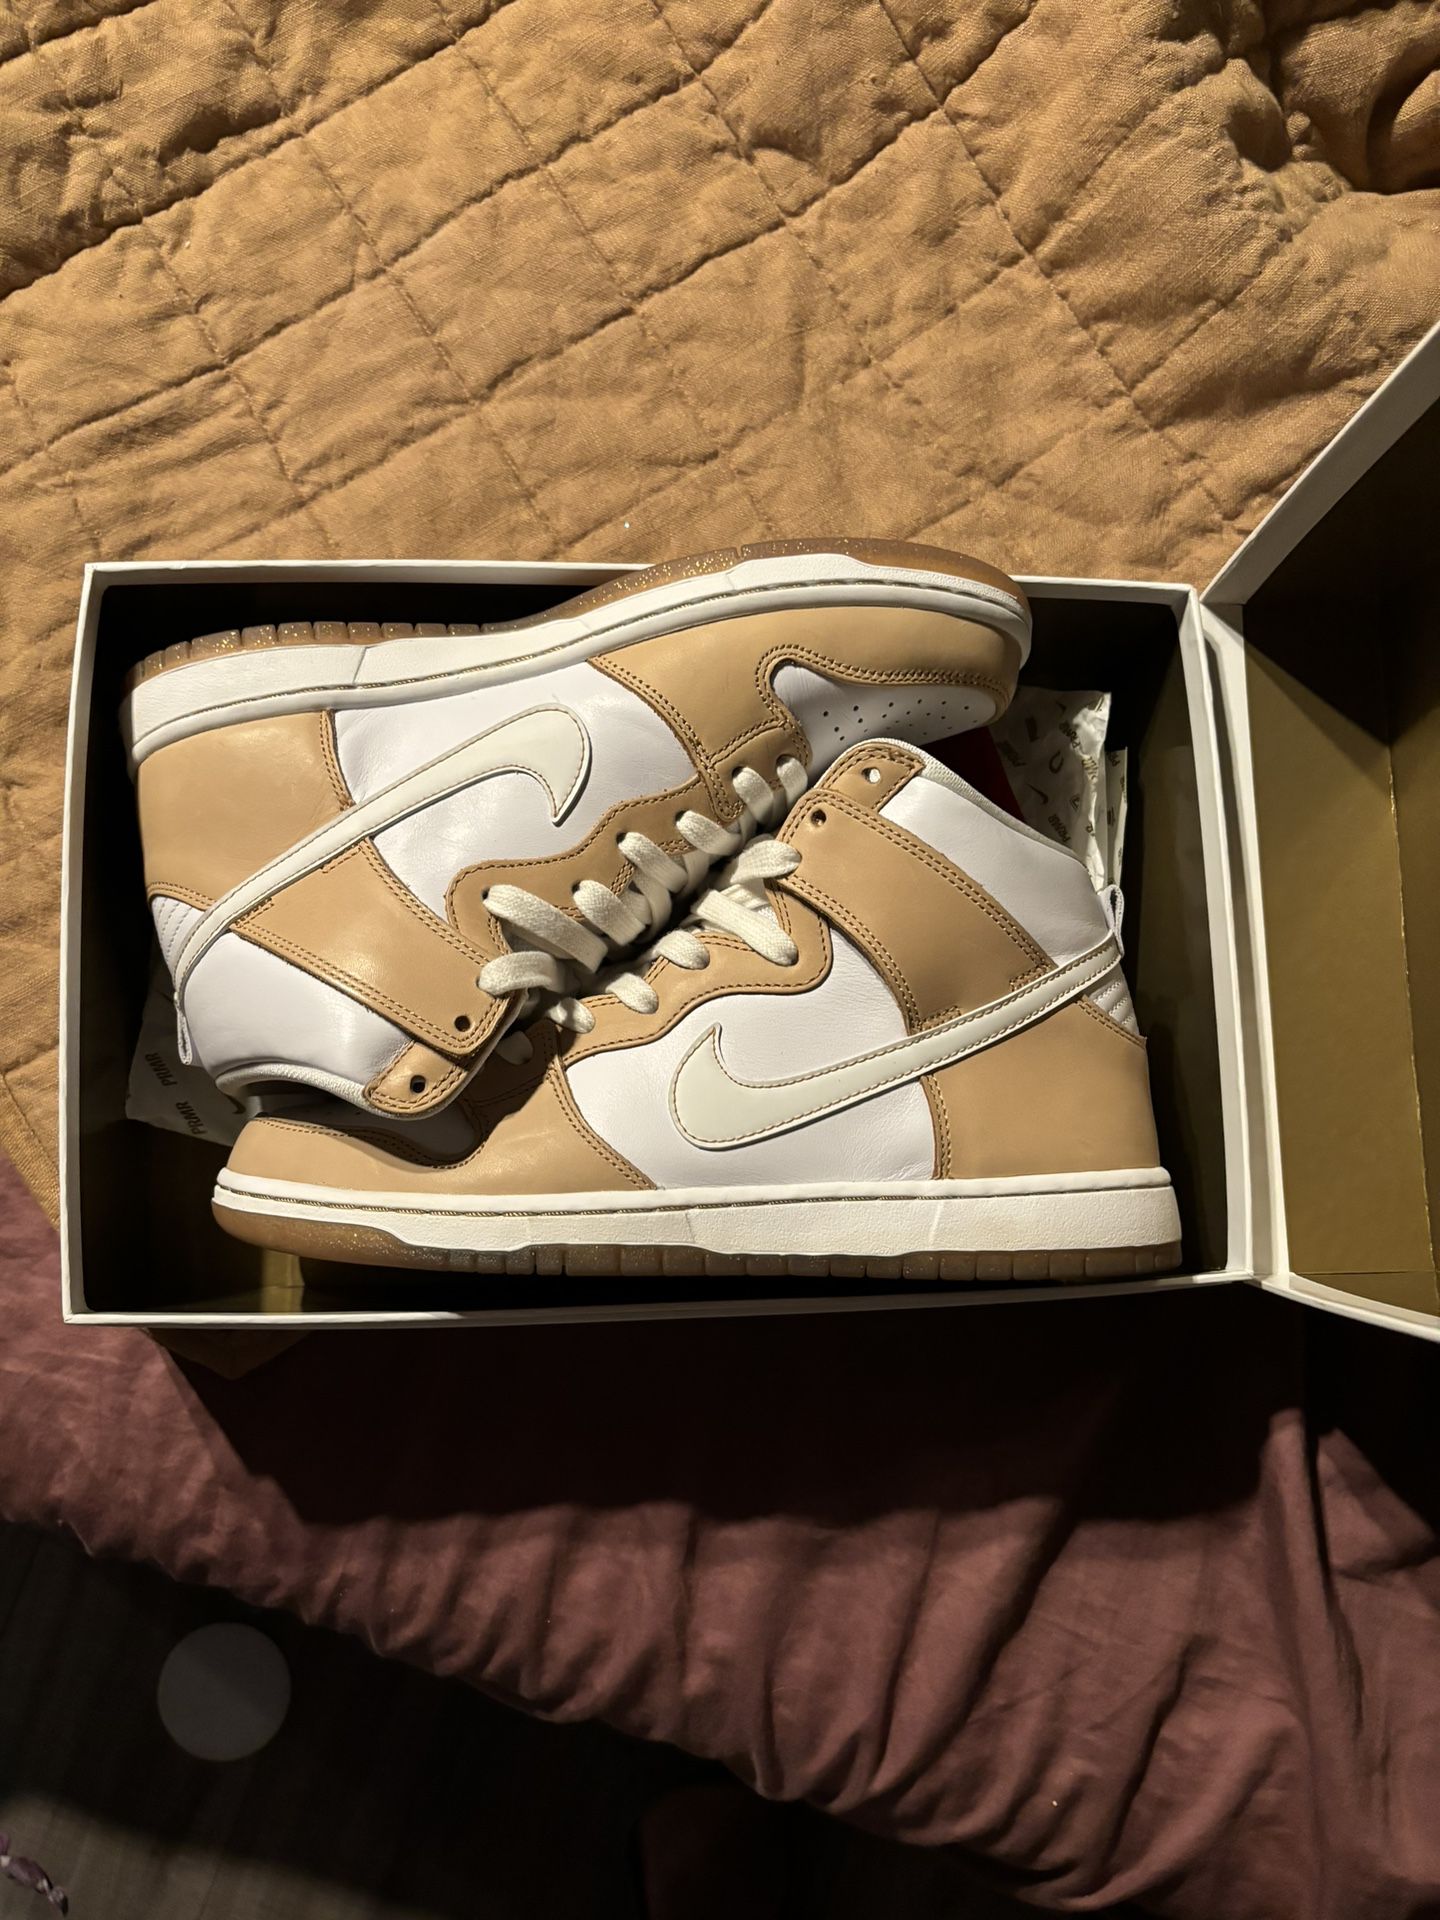 Nike Sb Dunk High Premier Win Some Lose Some  Size 9.5